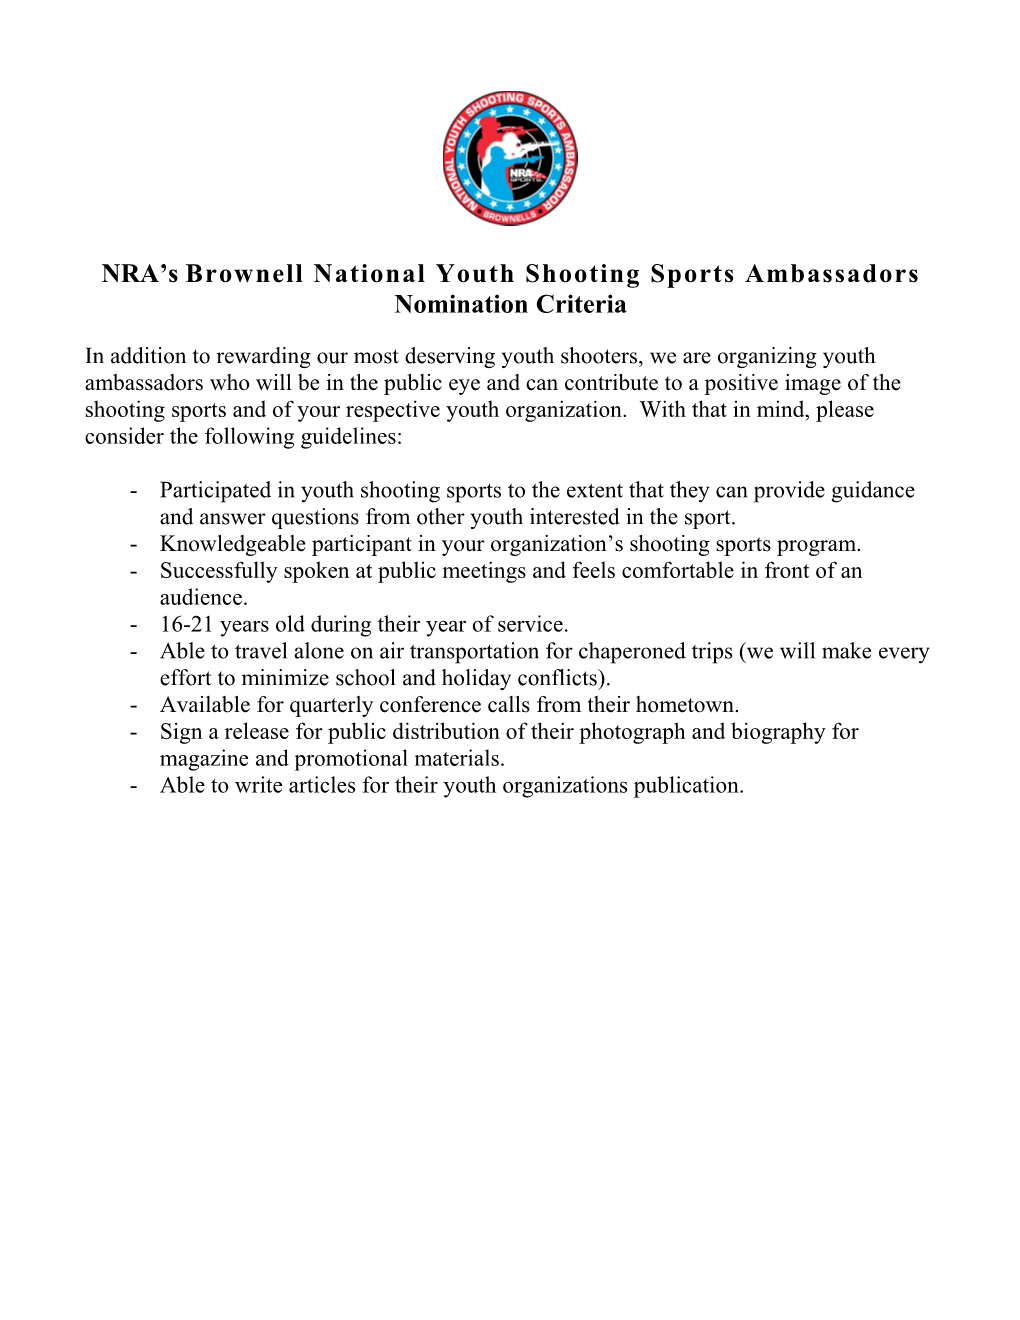 NRA S Brownell National Youth Shooting Sports Ambassadors